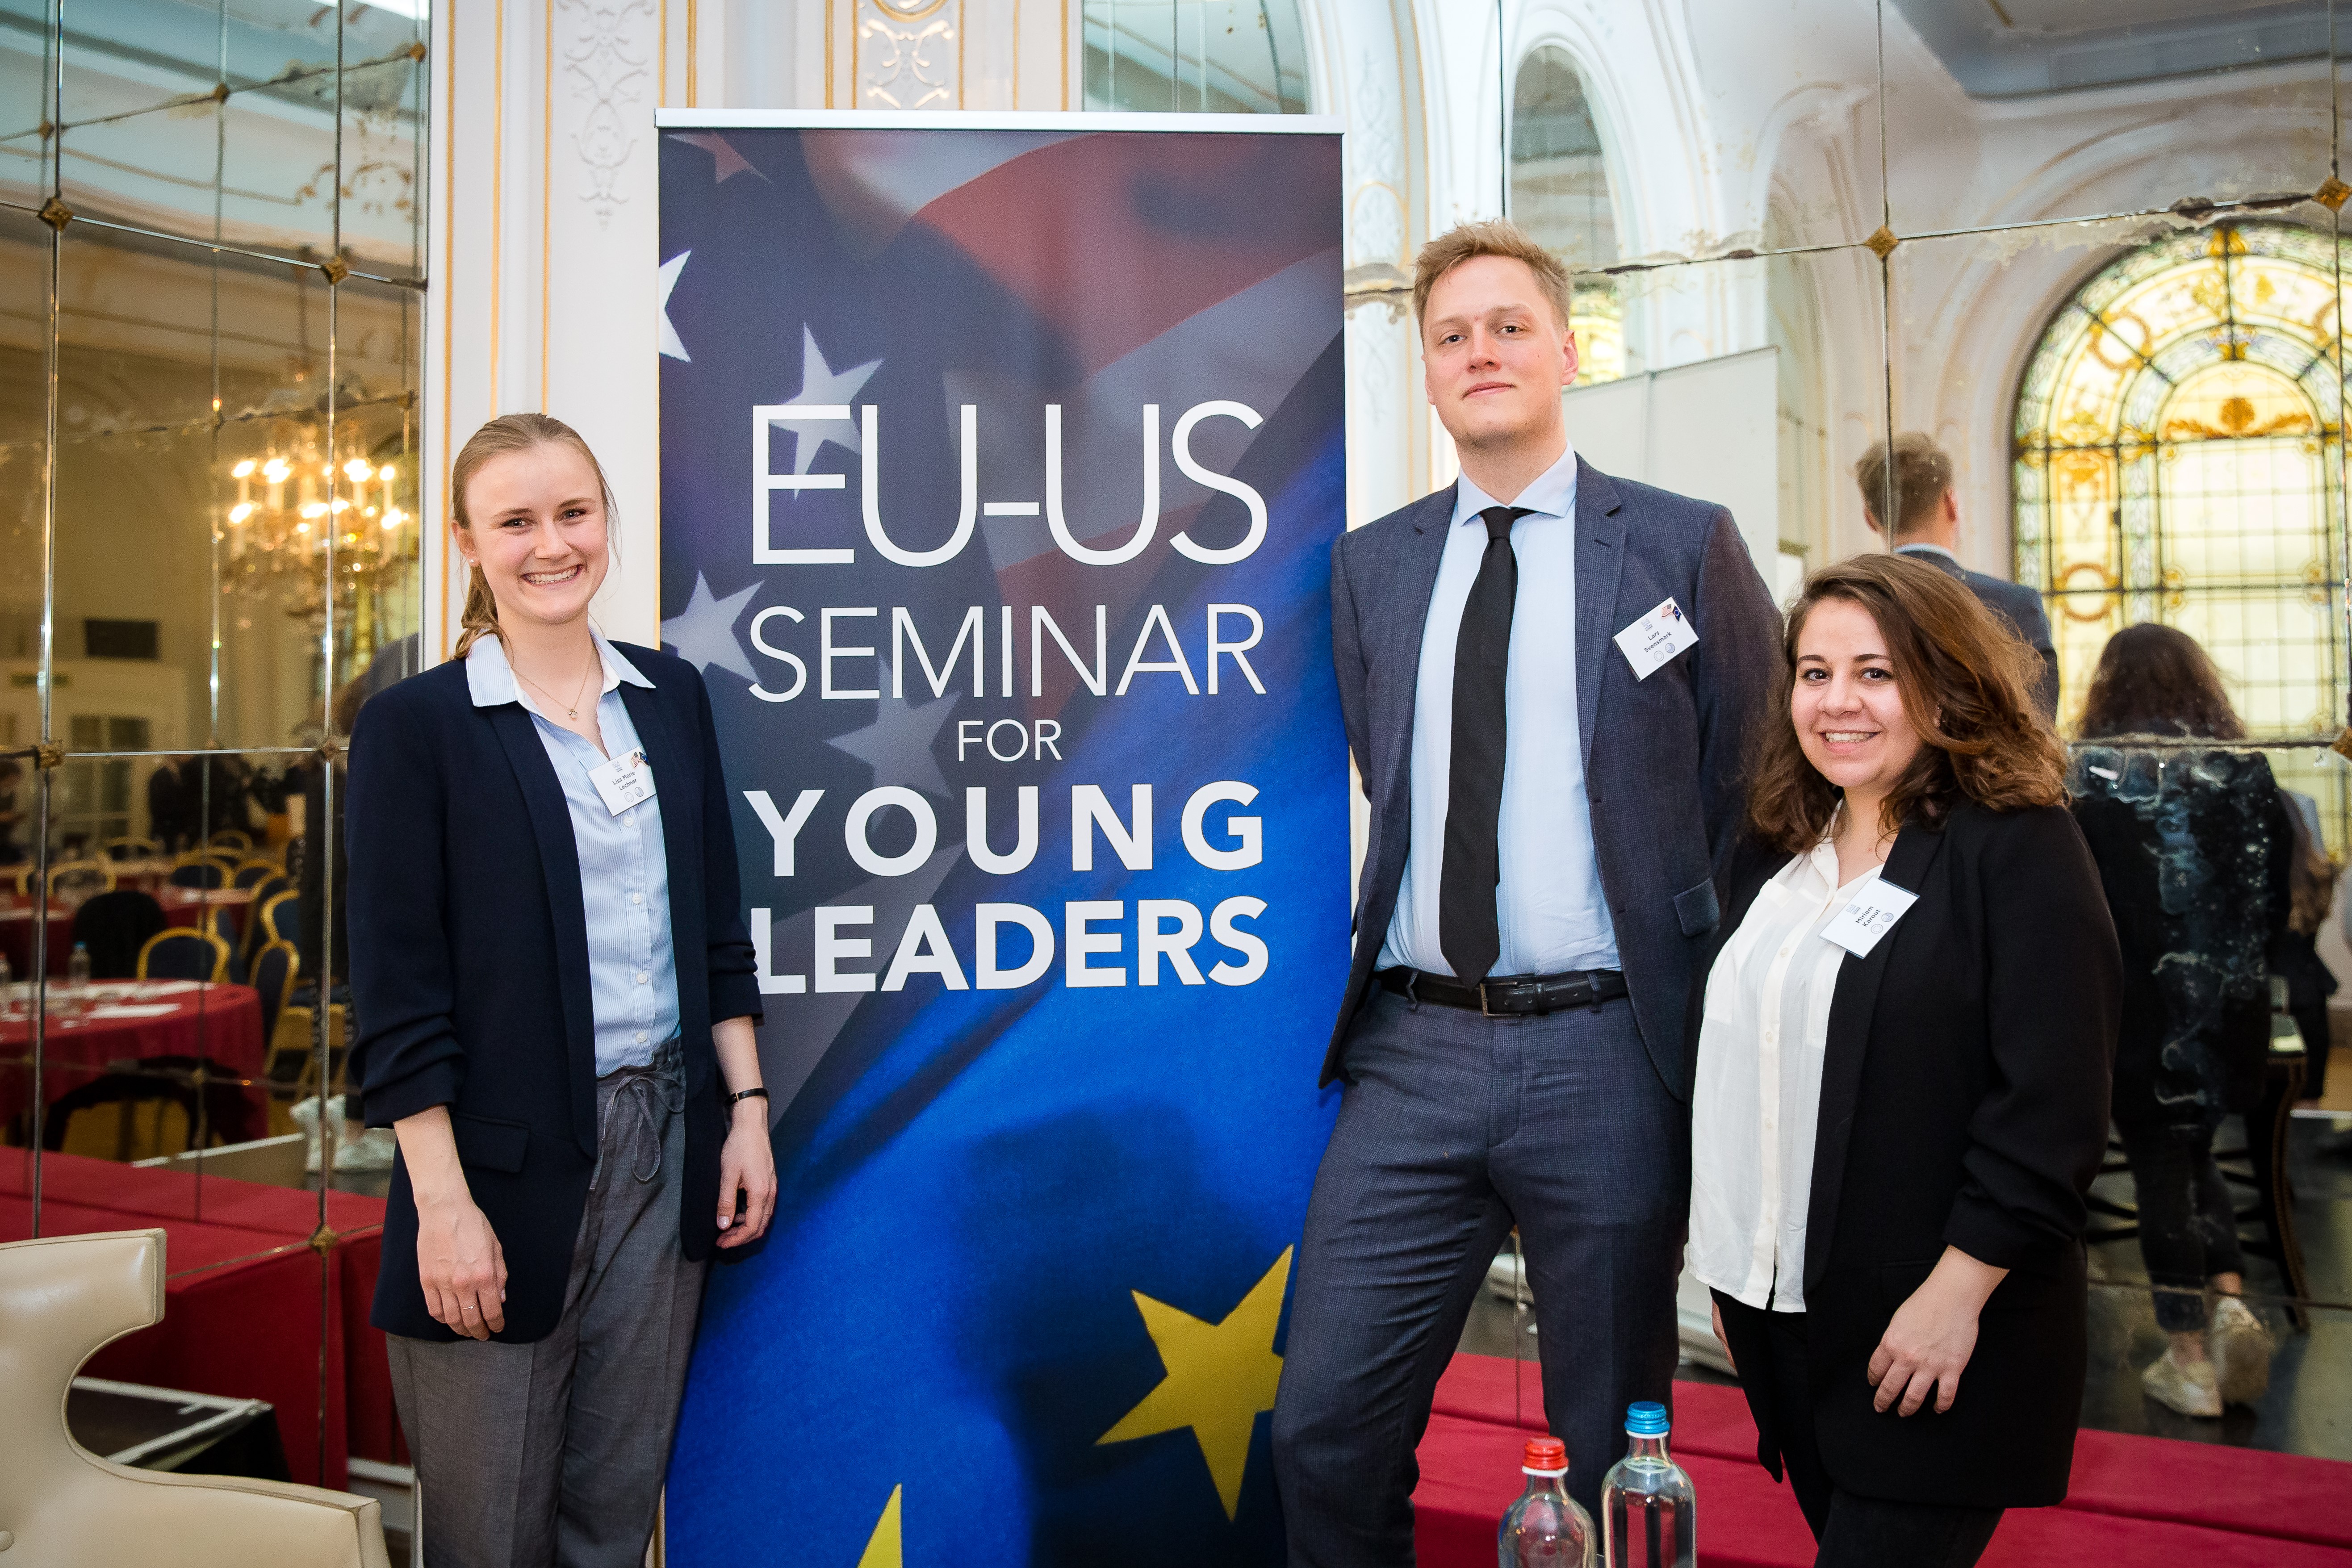 Lisa Lechner, Lars Svensmark and Miriam Karout stand in front of a pull up banner that says: EU-US Seminar for Young Leaders